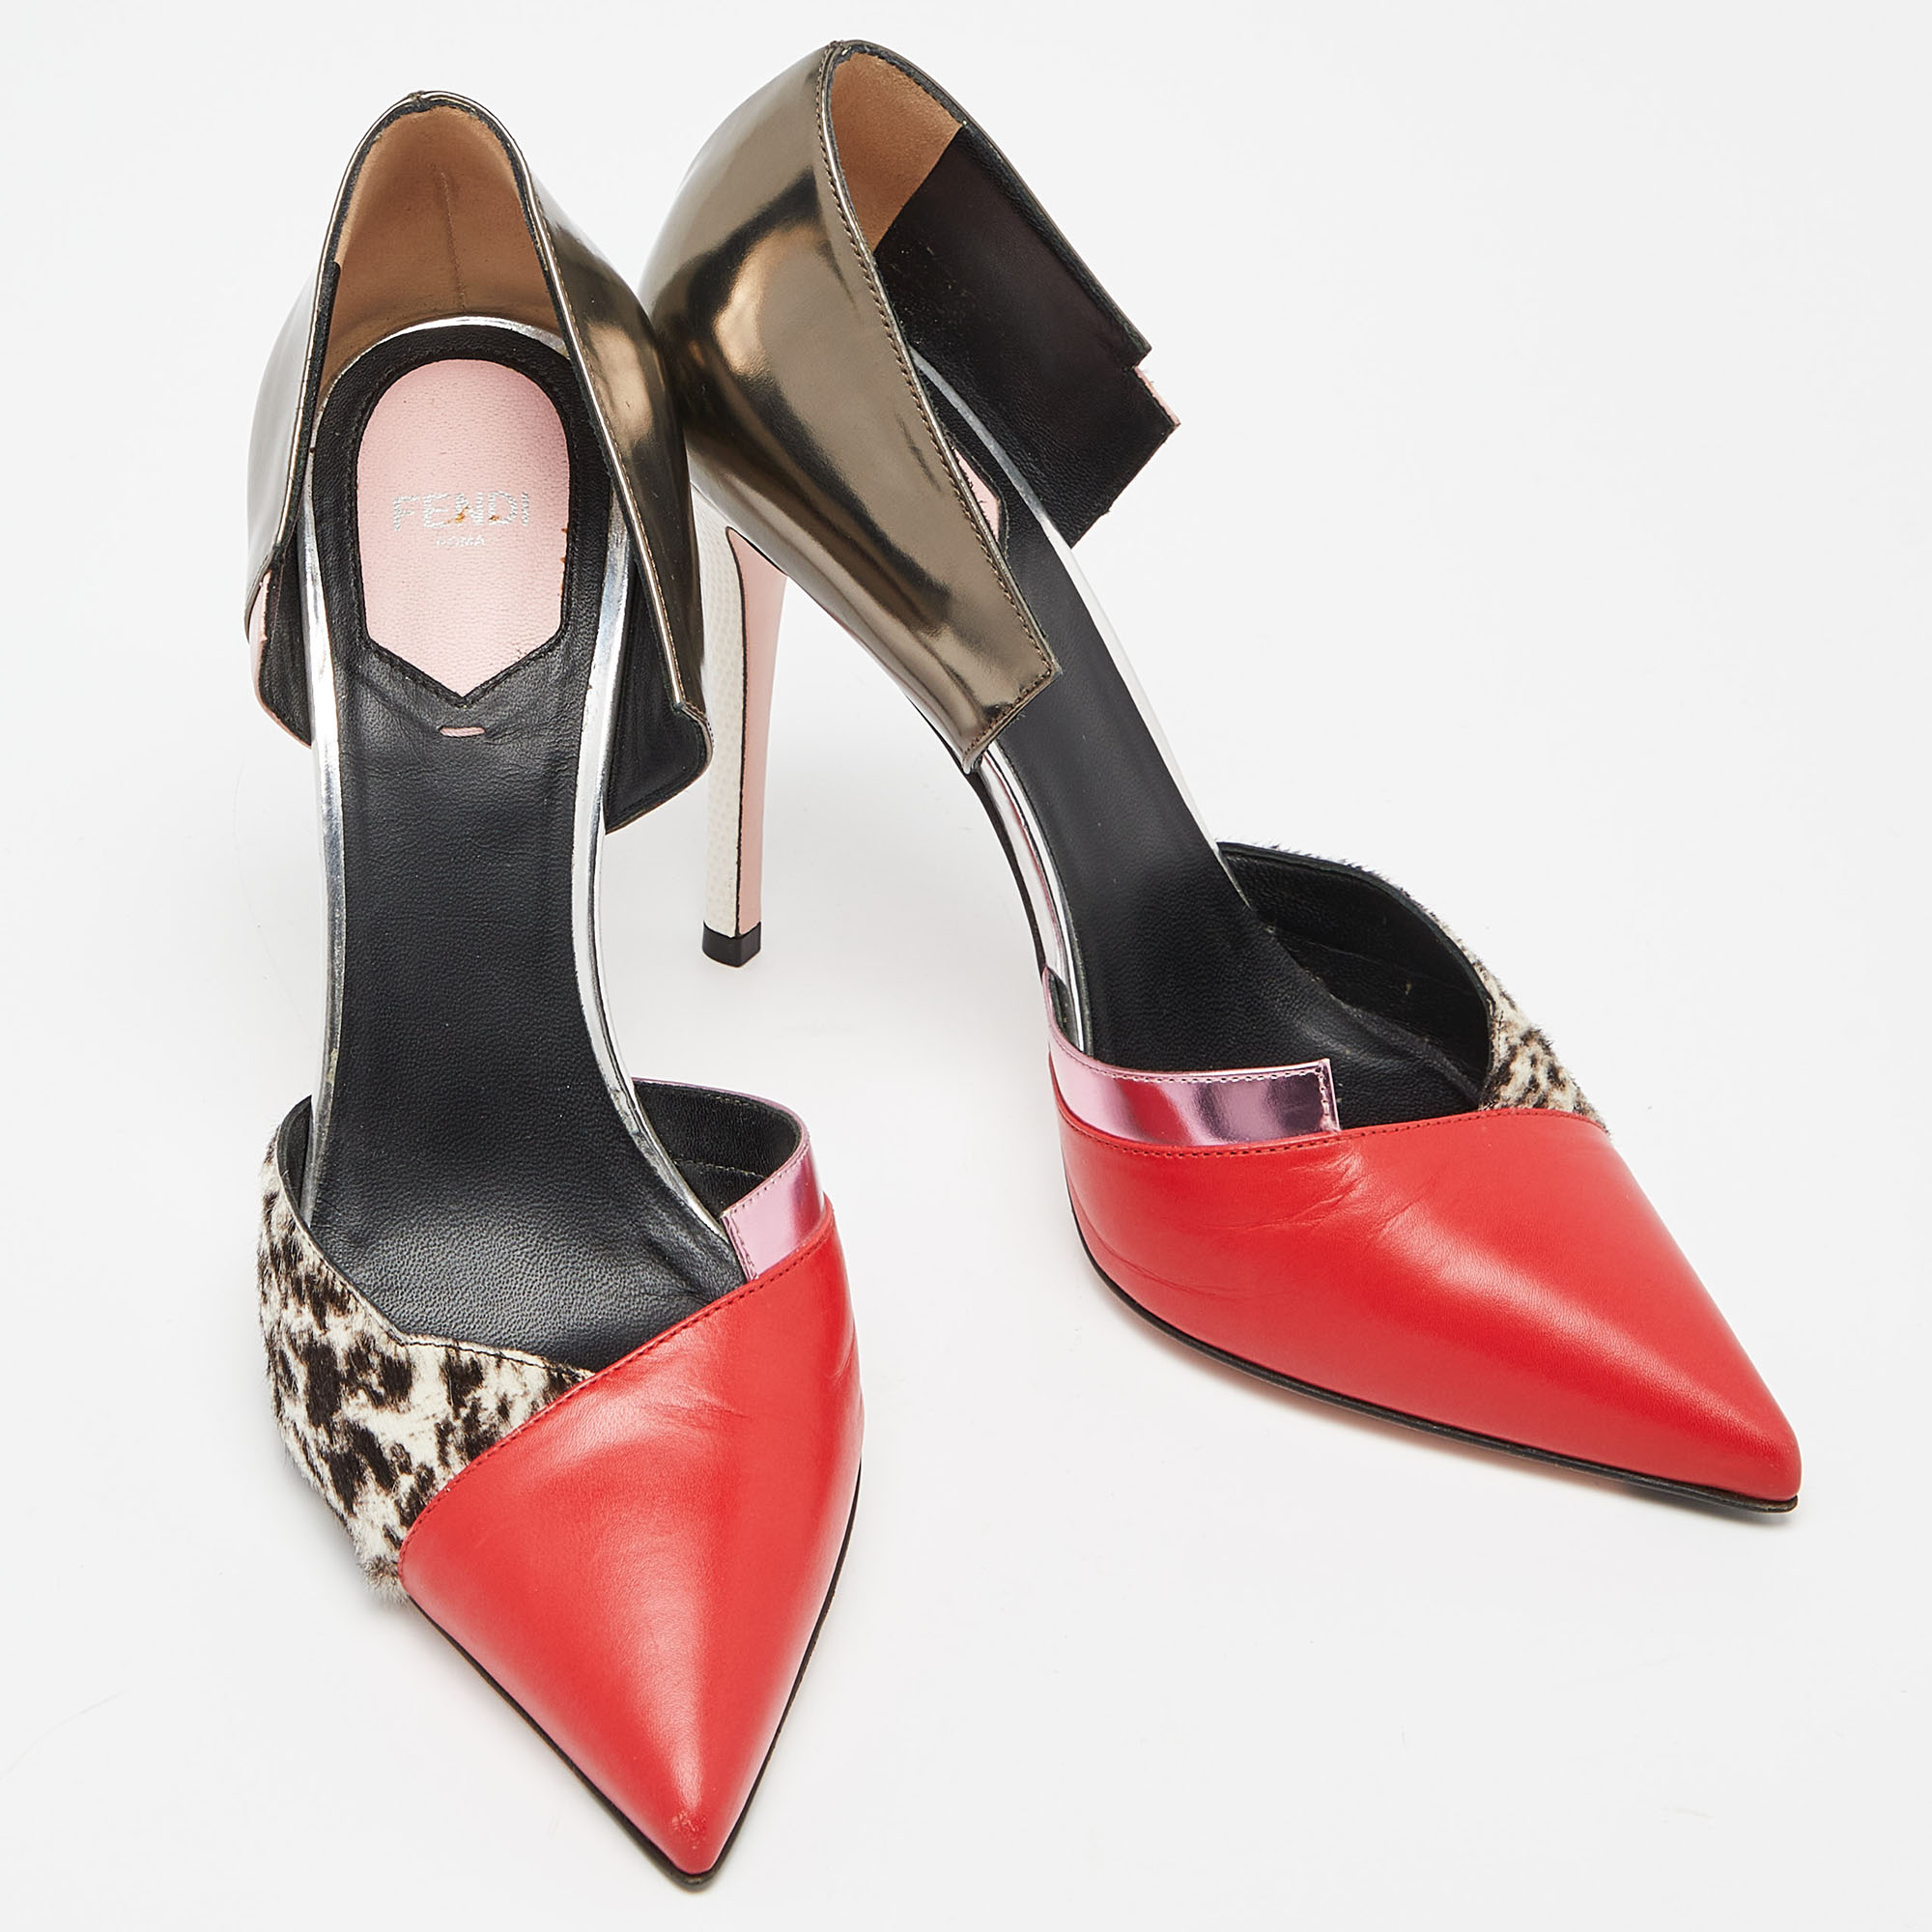 Fendi Multicolor Calfhair, Leather And Patent Trim Pointed Toe Pumps Size 39